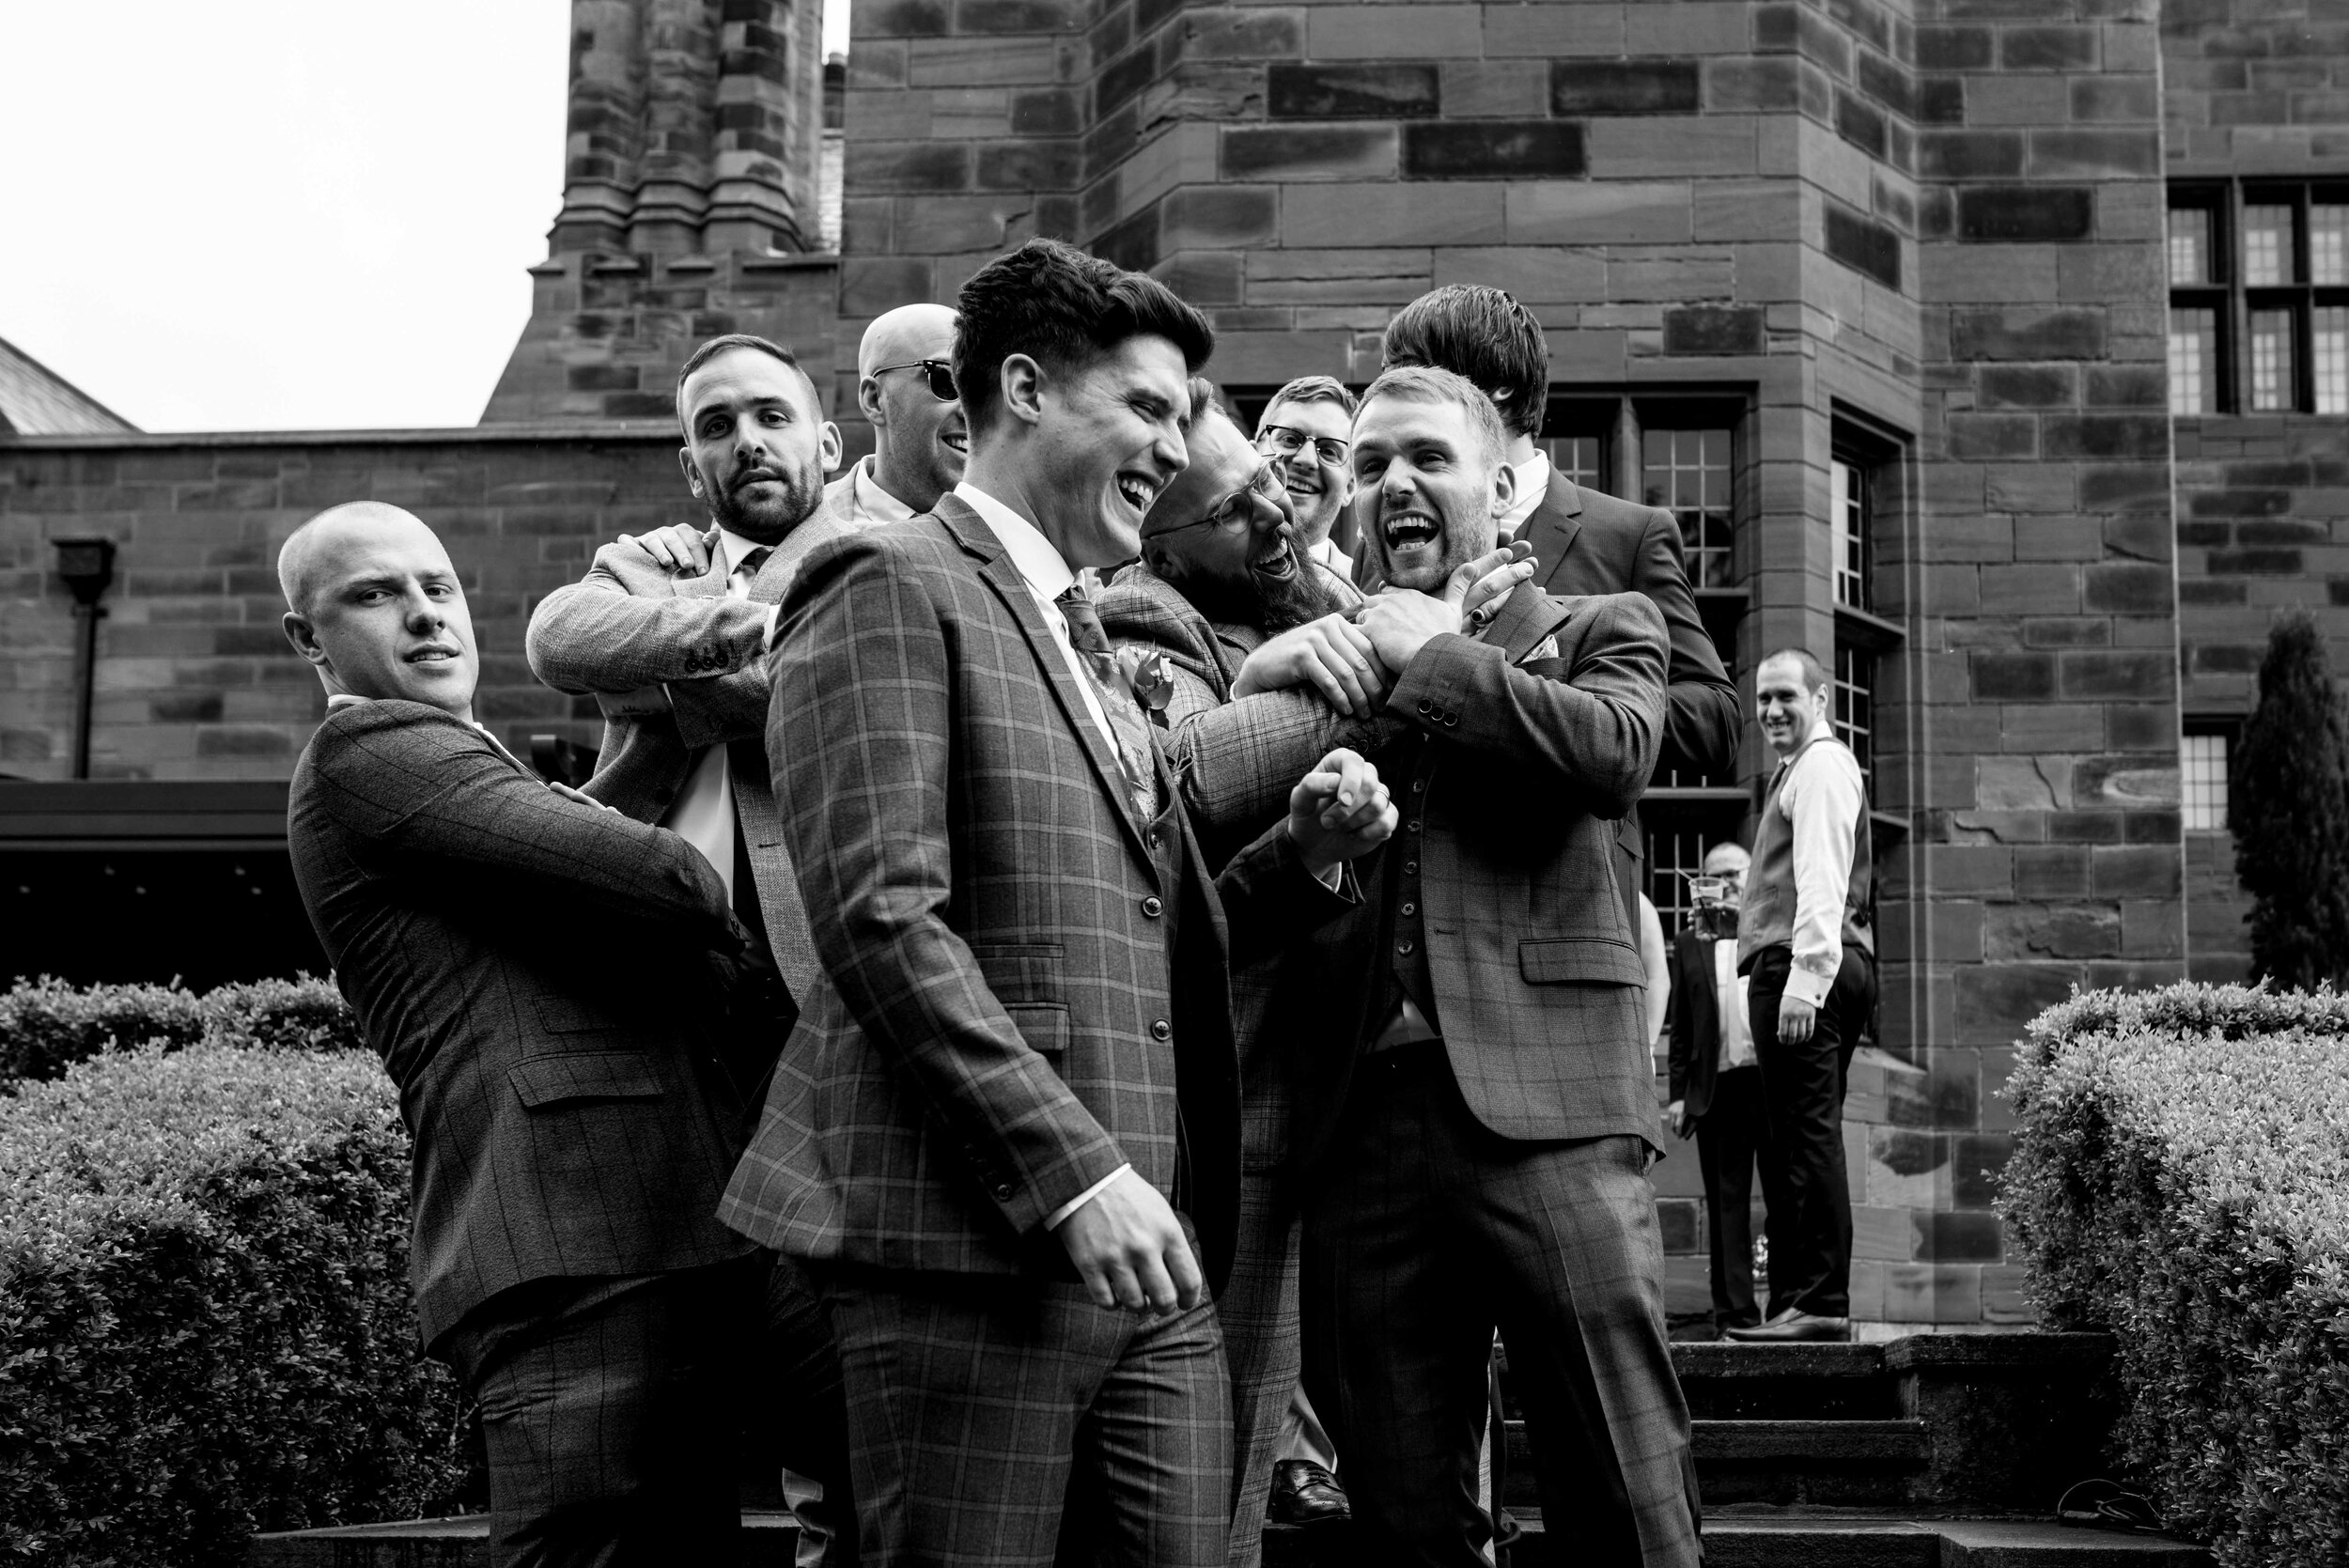 The groom and his groomsmen messing around together on the Abbey House steps